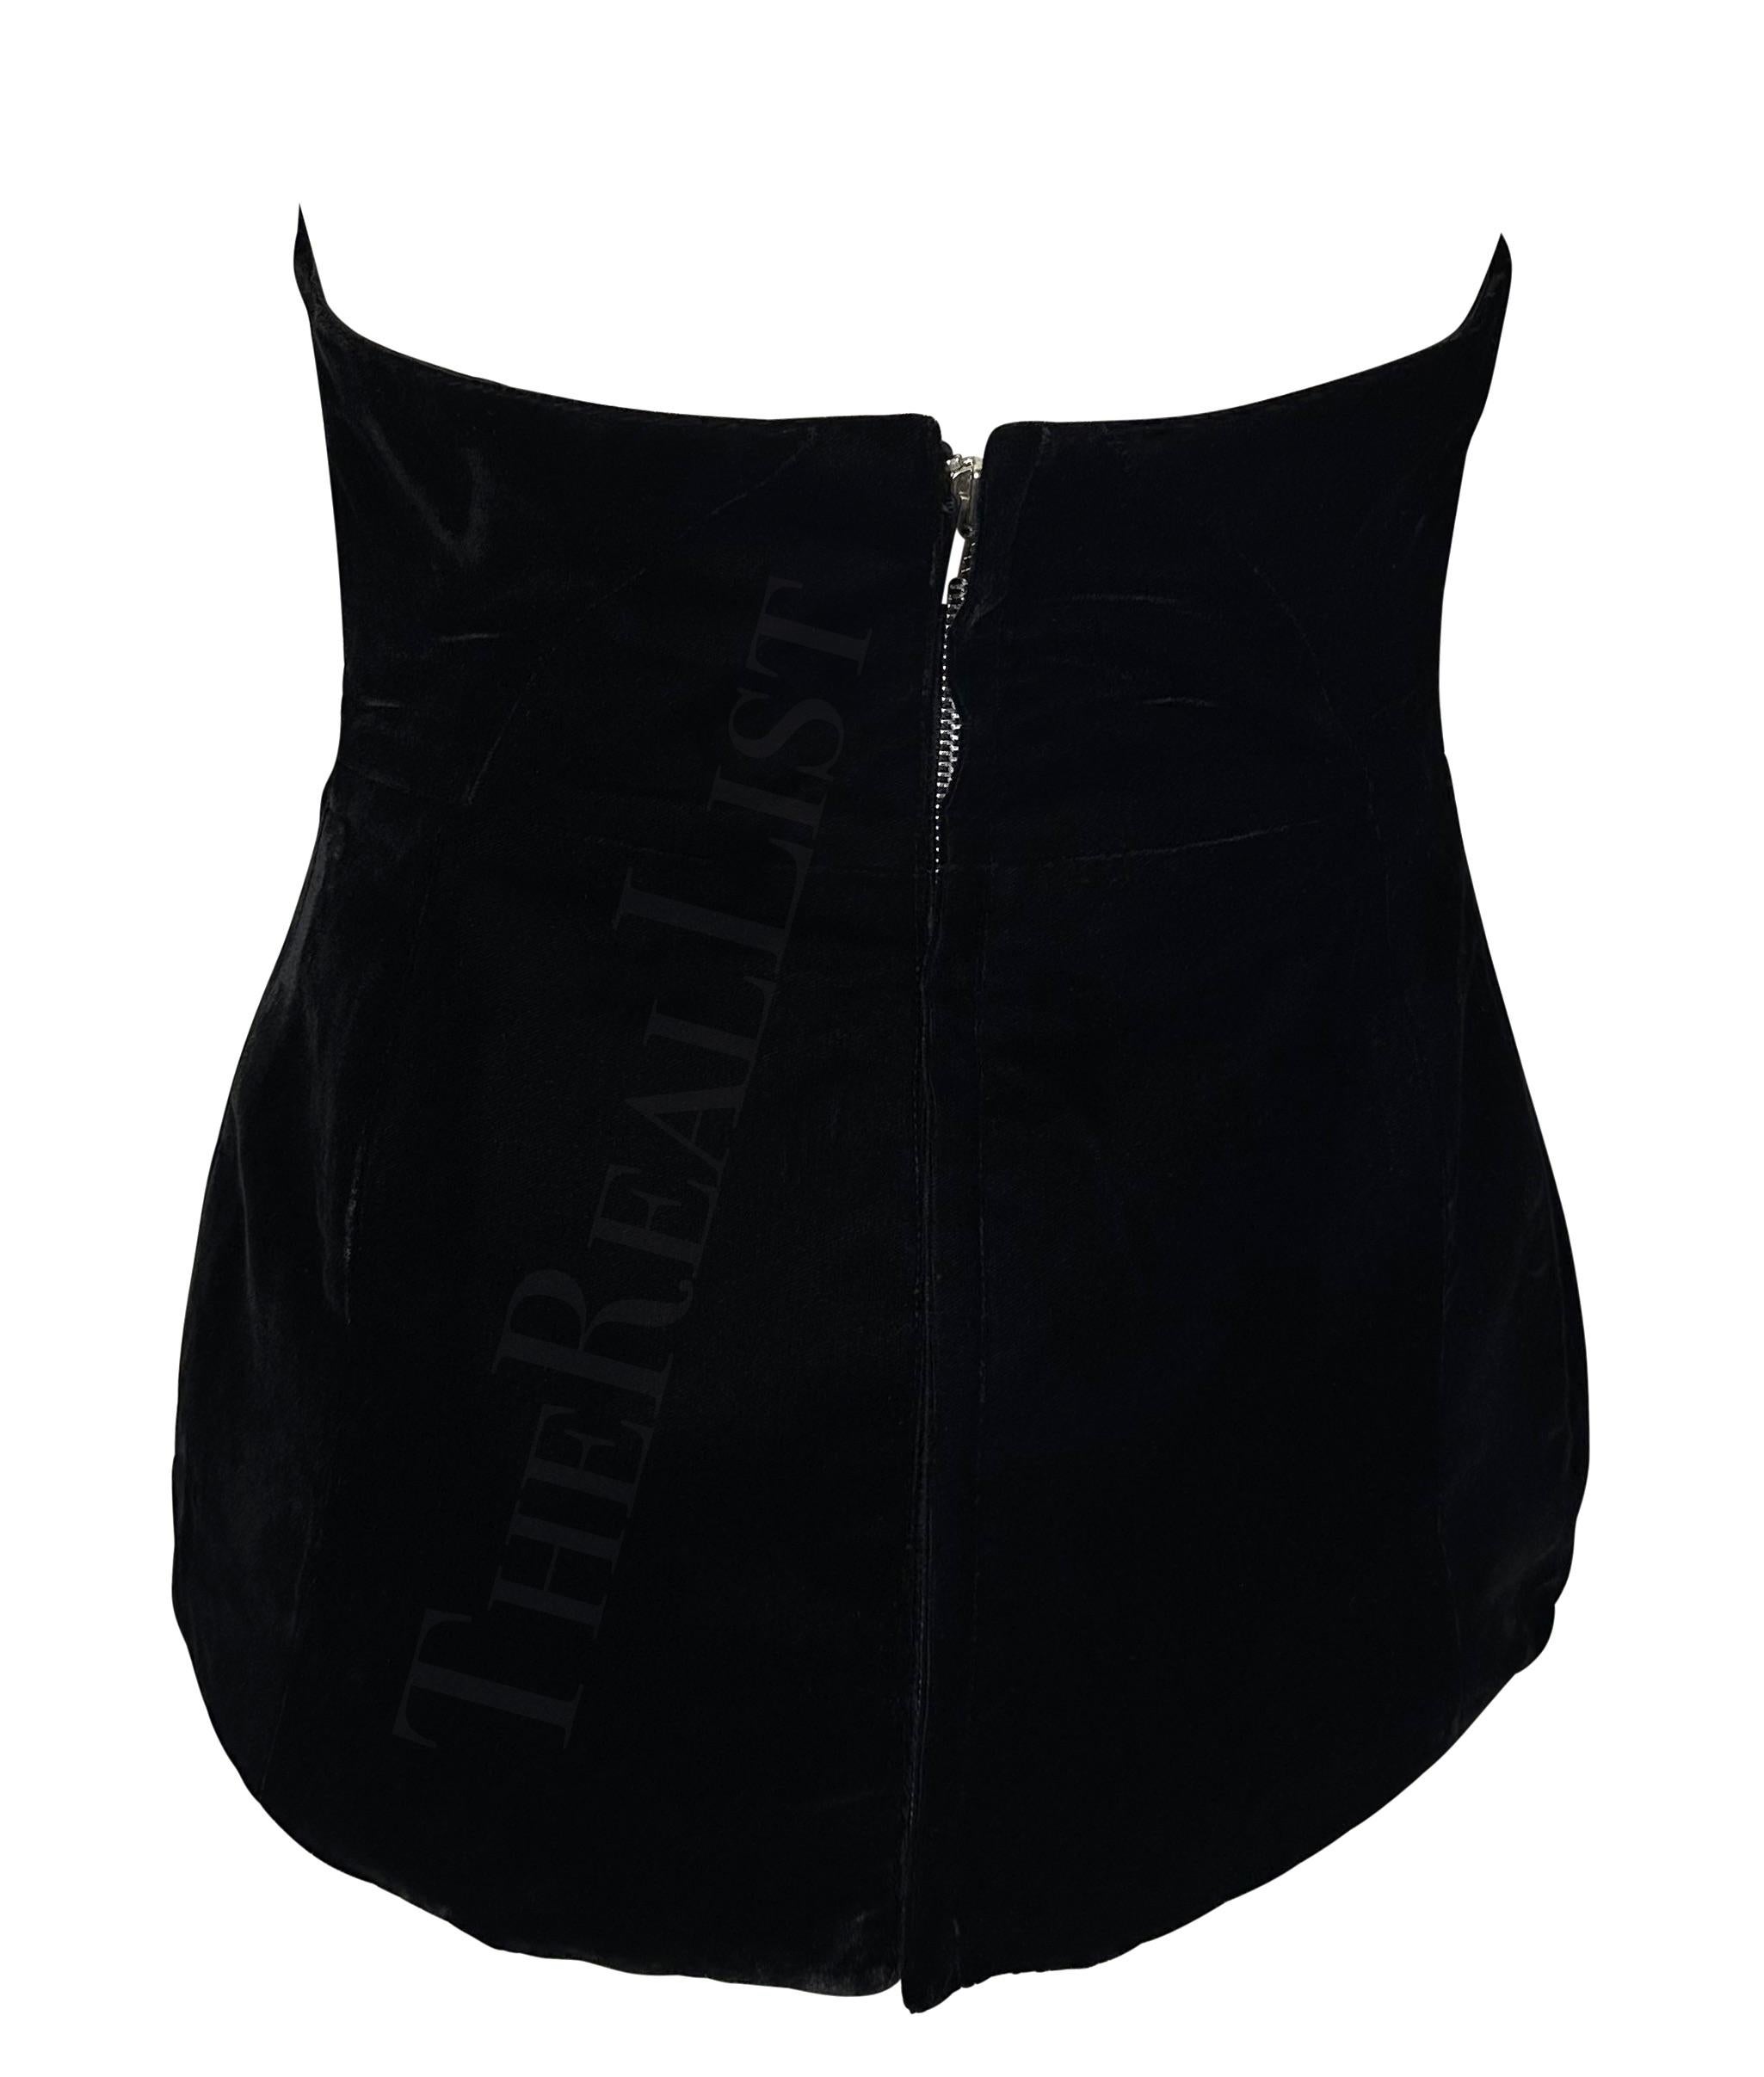 F/W 1987 Thierry Mugler Curved Black Velvet Bustier Cutout Crop Top For Sale 1